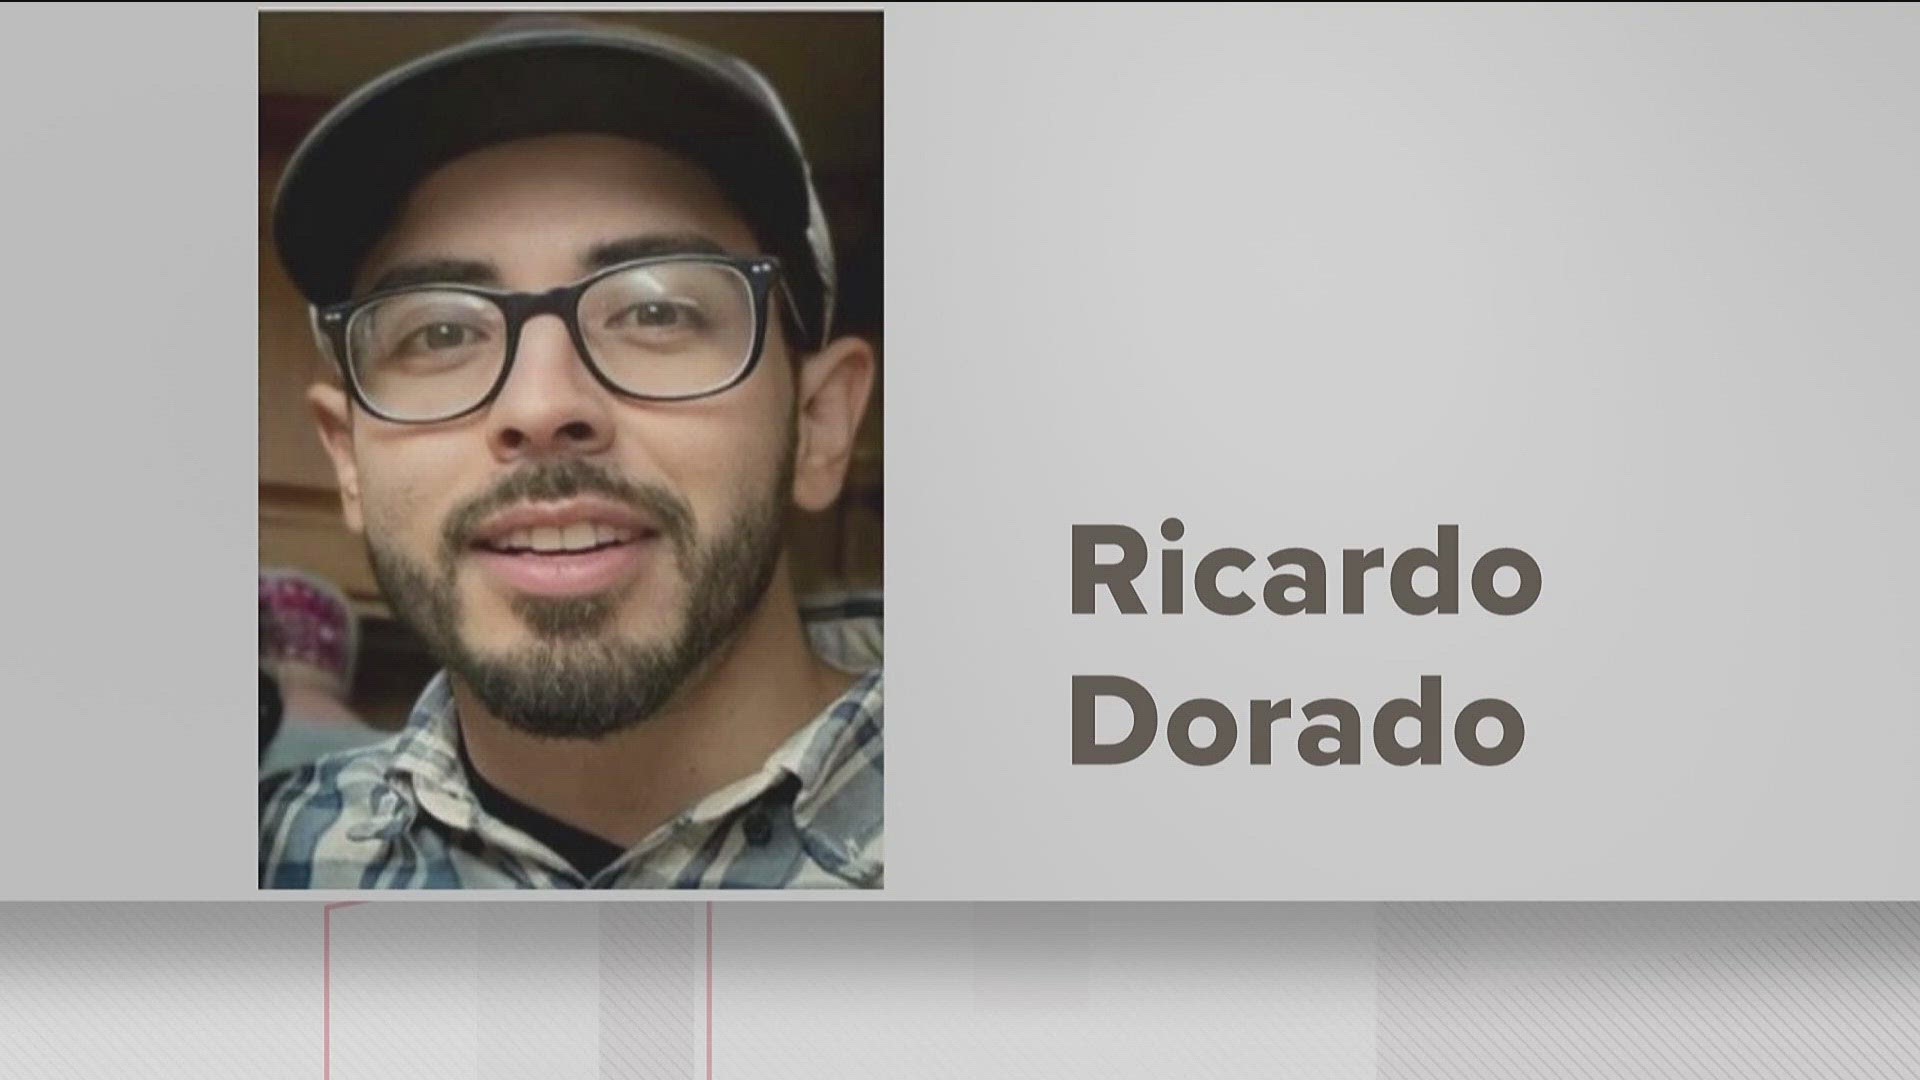 Dorado died after being taken into custody by Atlanta Police. Officers placed him face down as they tried to handcuff him at a BP gas station last year.